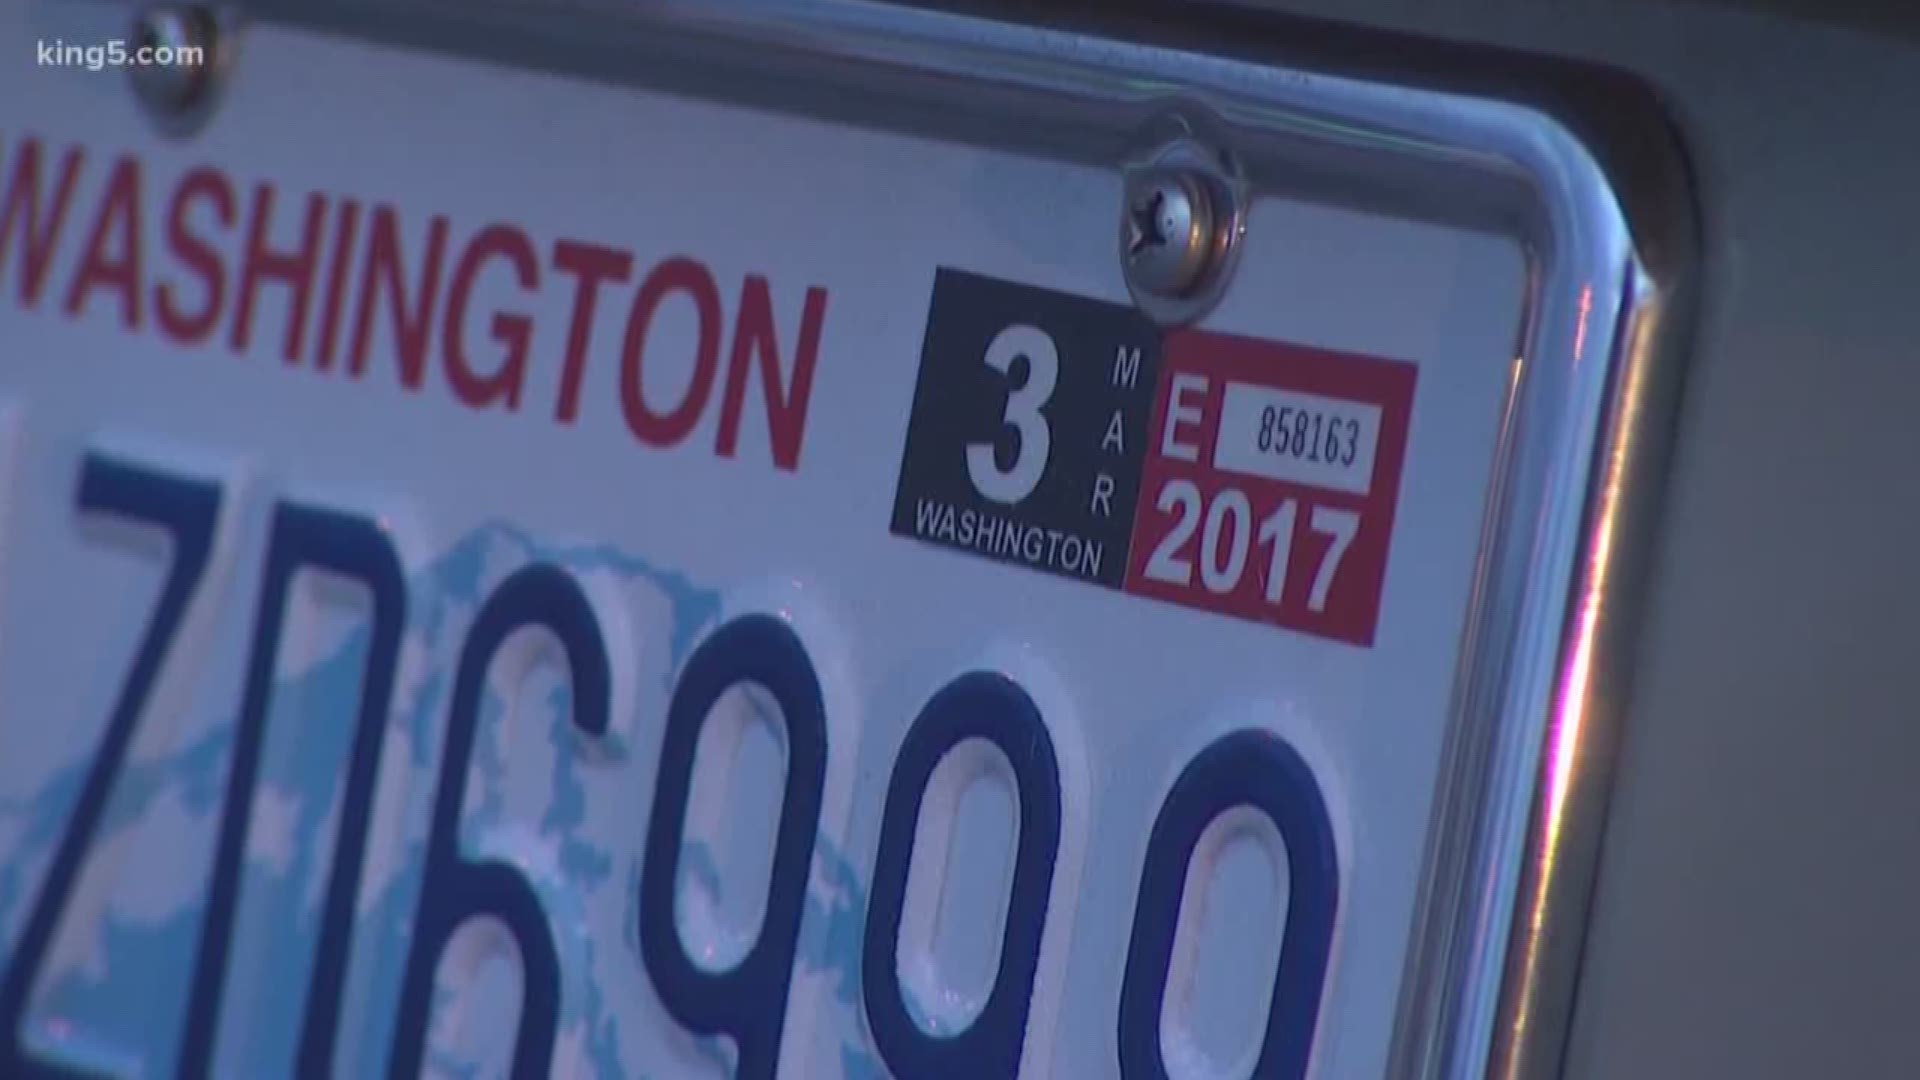 Seven Washington drivers filed a lawsuit against Sound Transit over car tab fees. KING 5's Drew Mikkelsen reports.